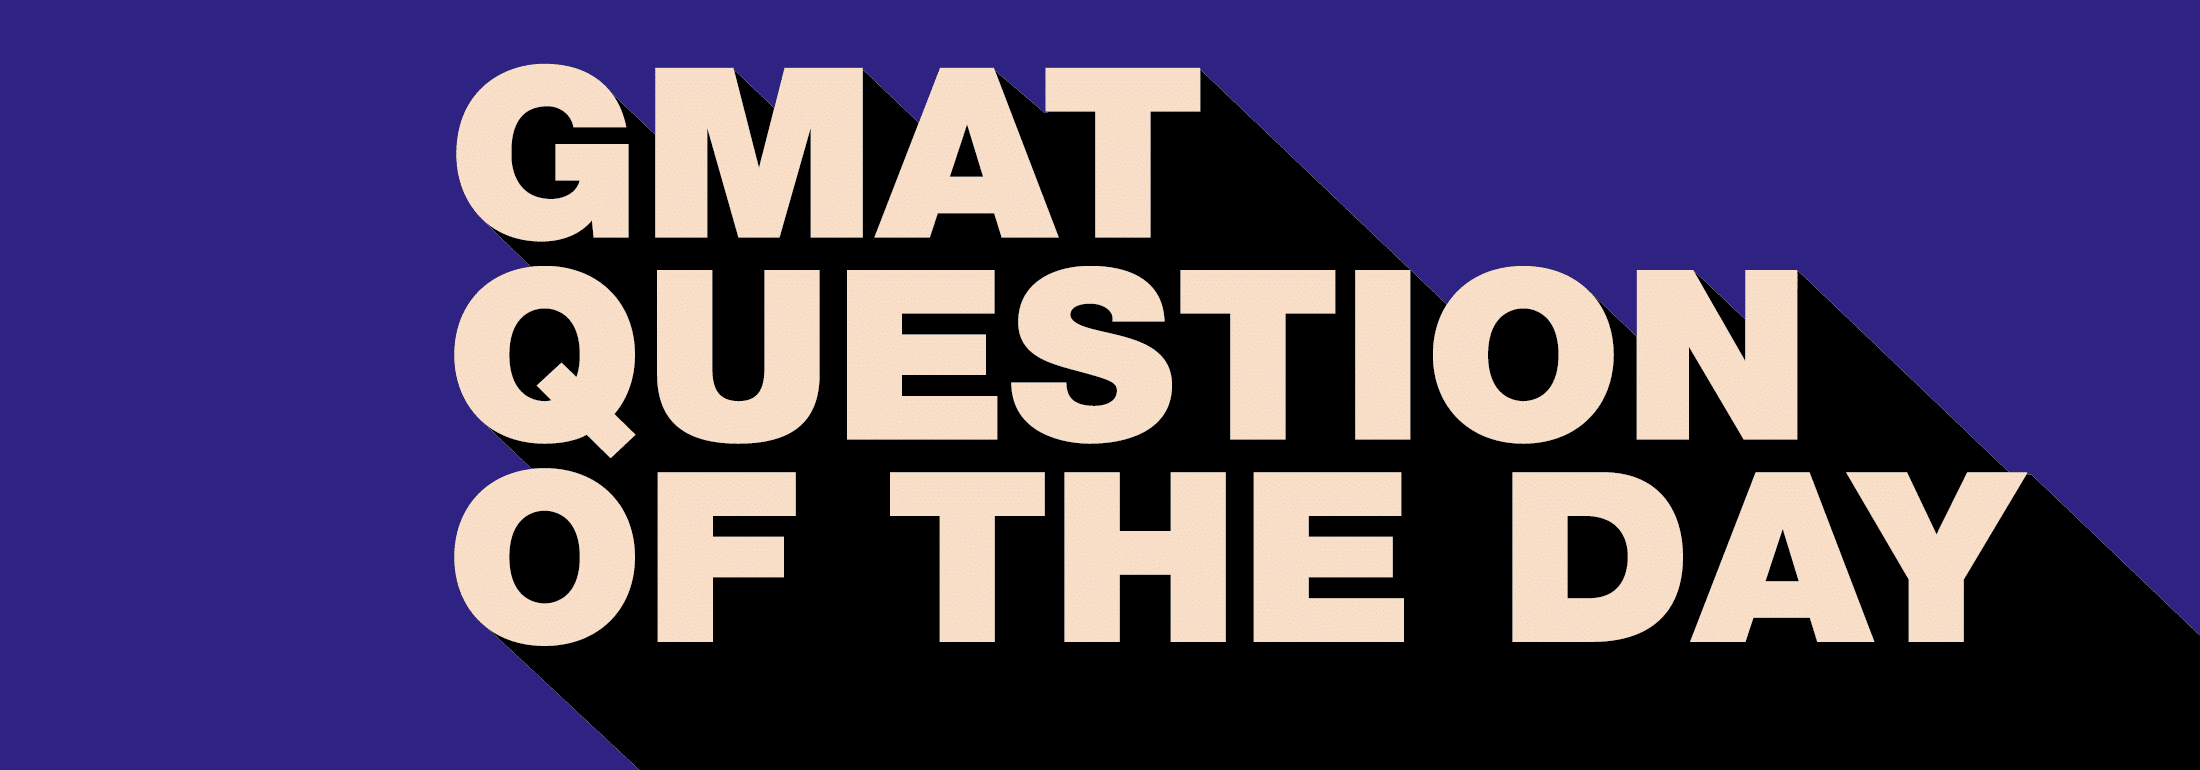 GMAT Question of the Day